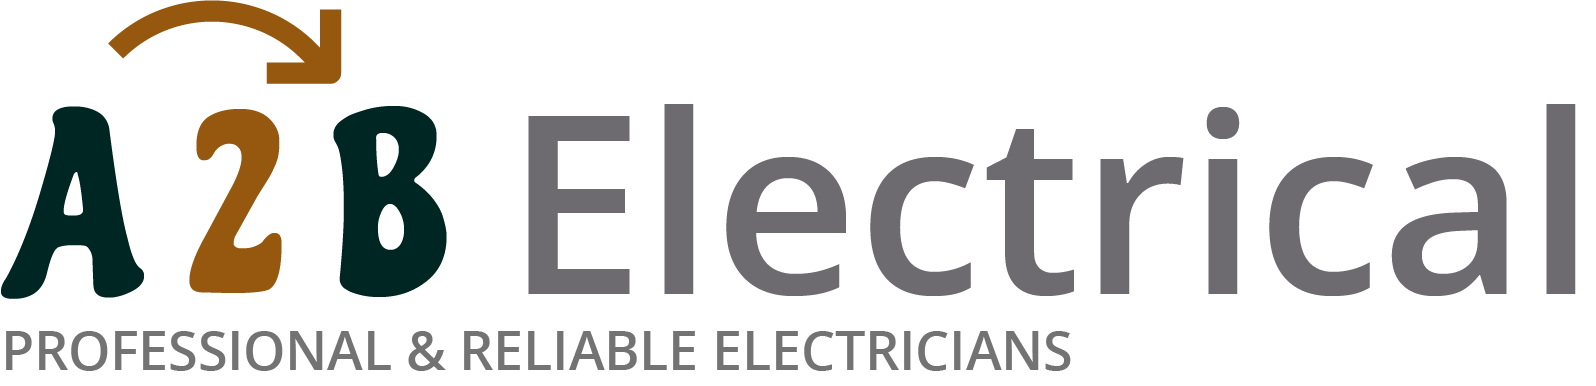 If you have electrical wiring problems in Ruislip, we can provide an electrician to have a look for you. 